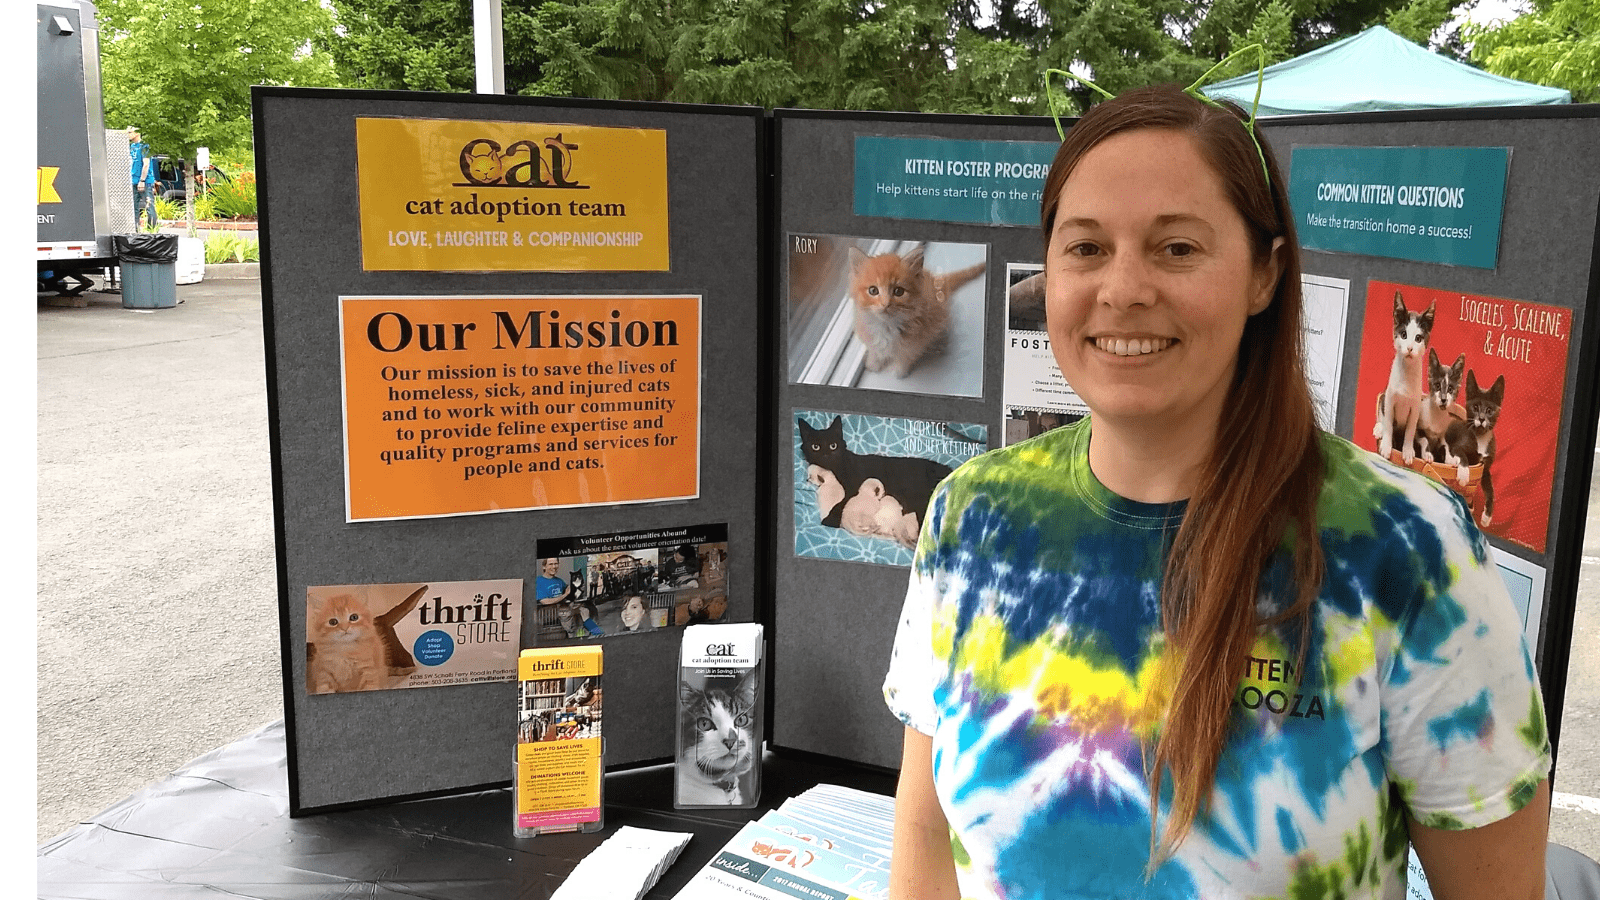 Mary Chambers wears a tie-dye T-shirt while staffing a CAT booth at an event.